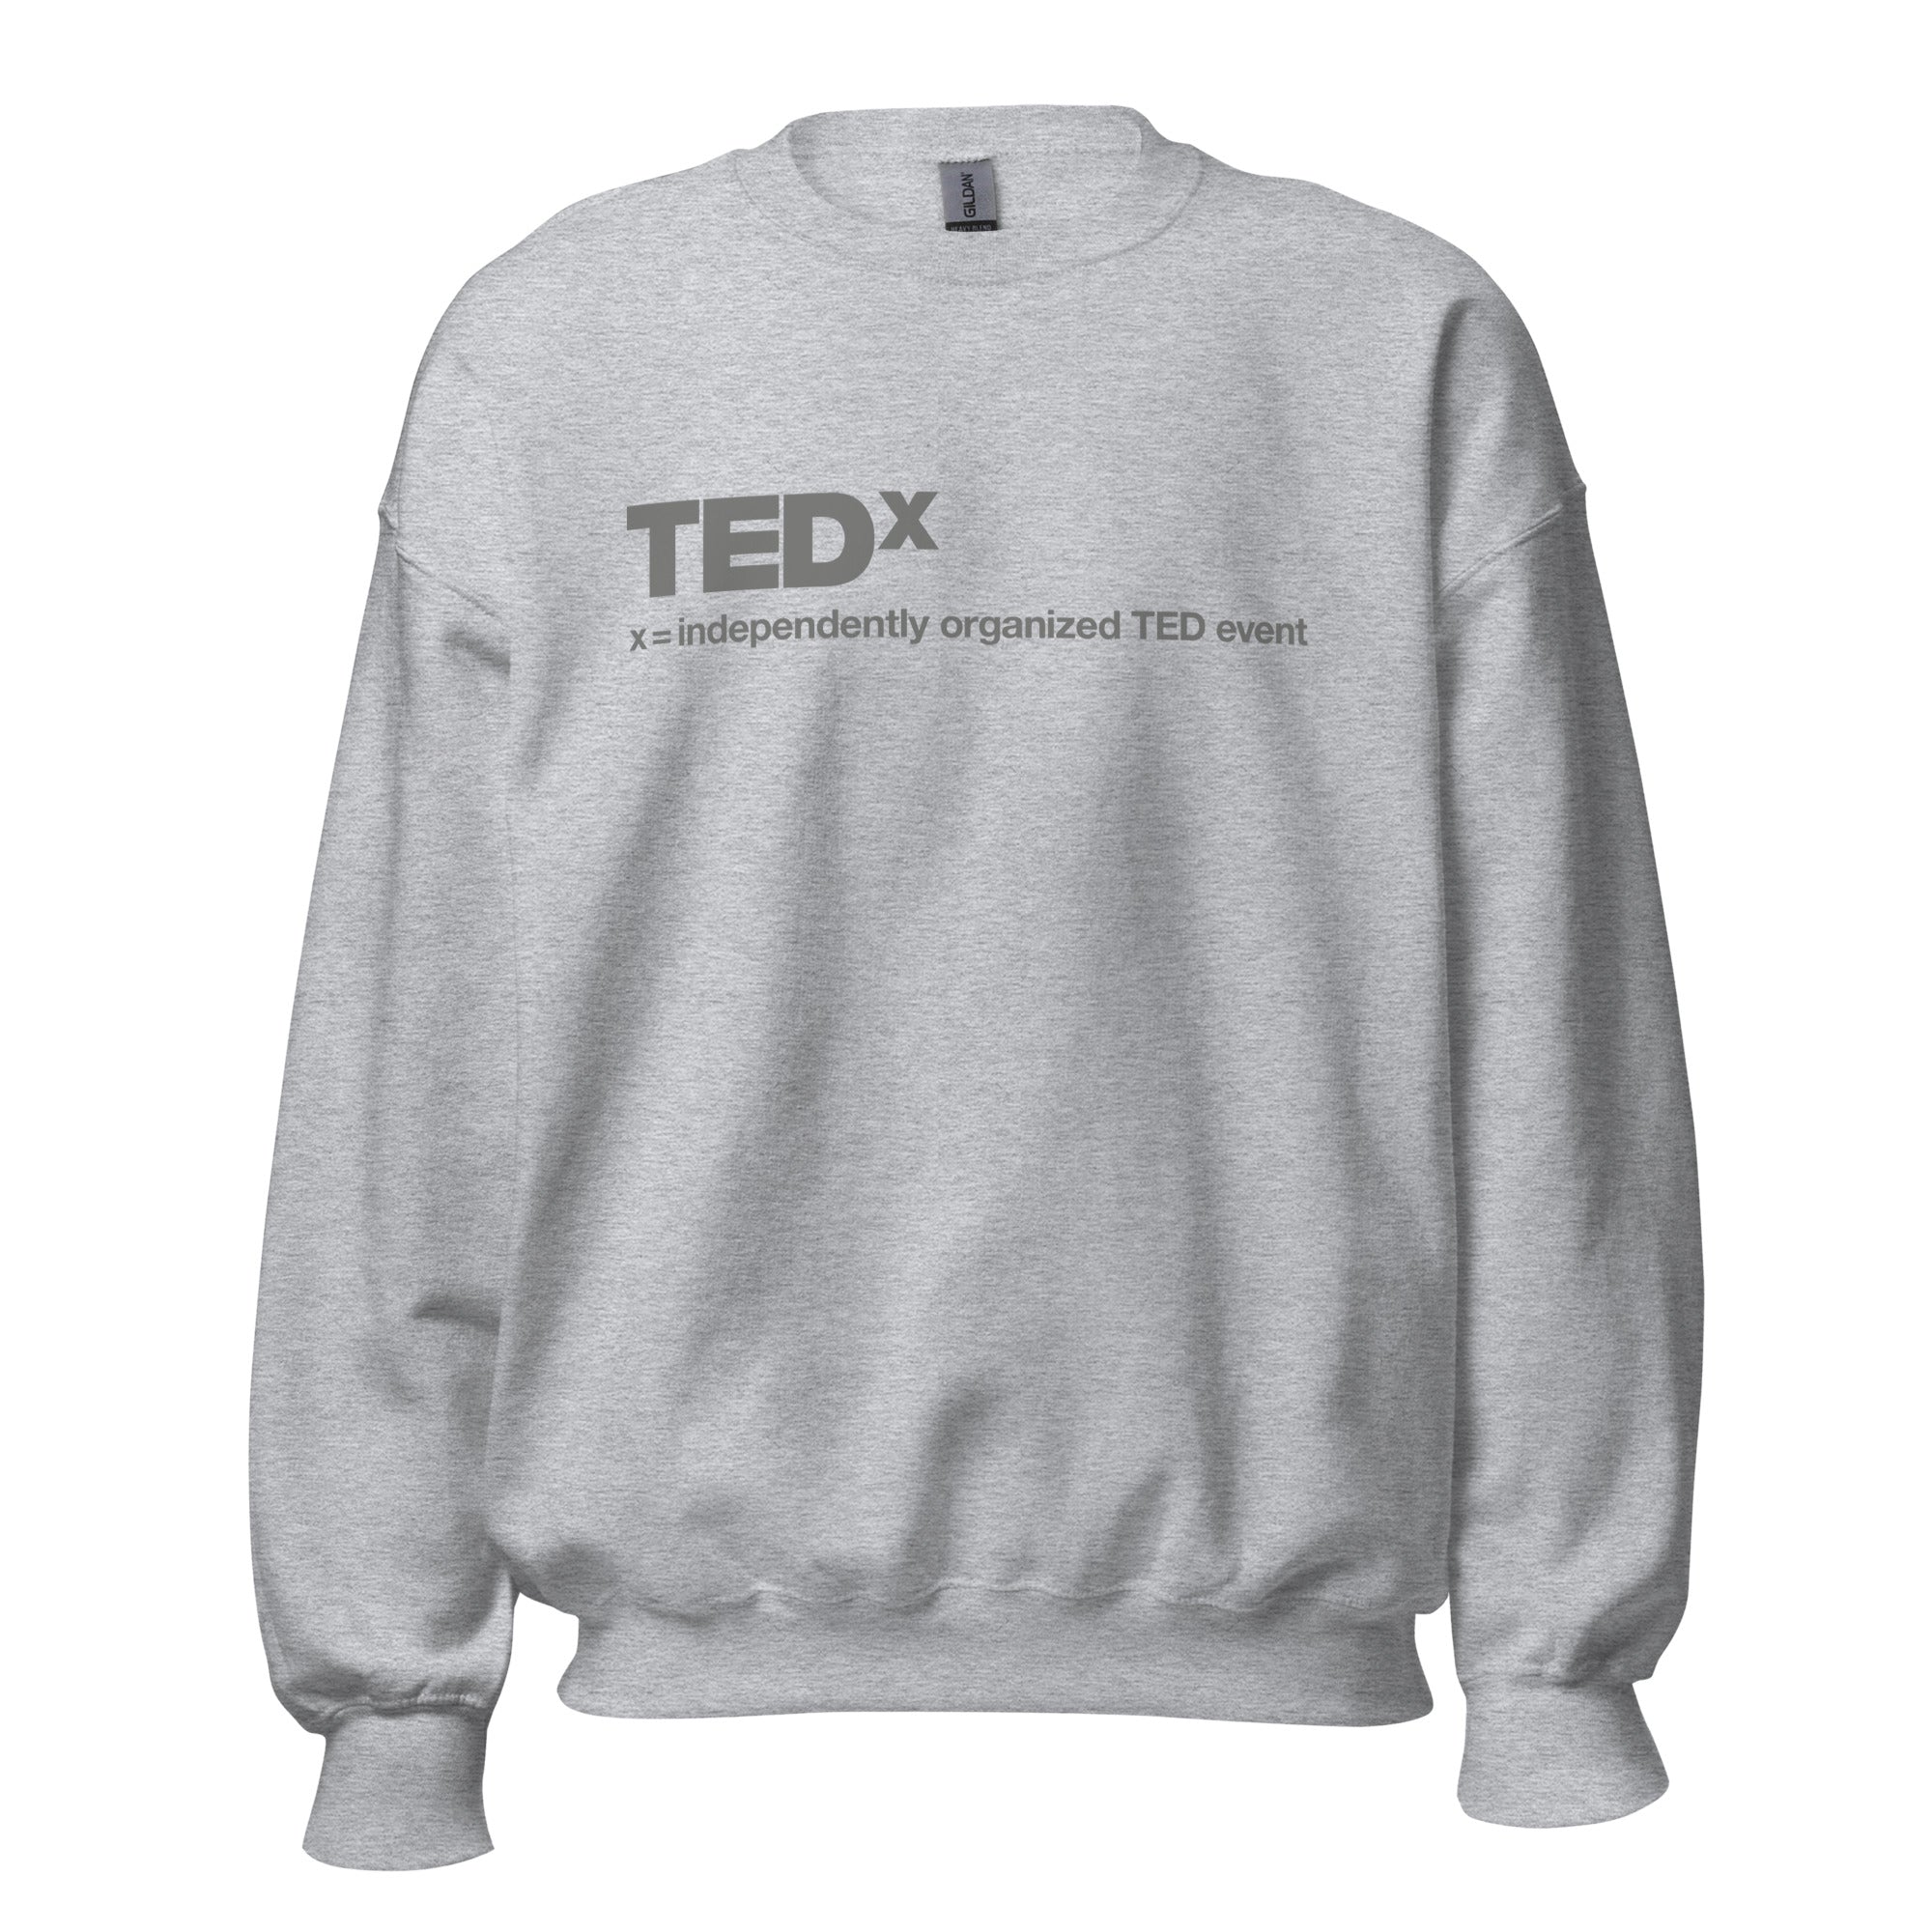 Unisex Crew Neck Sweatshirt - TEDx X = Independently Organized TED Event - GRAPHIC T-SHIRTS